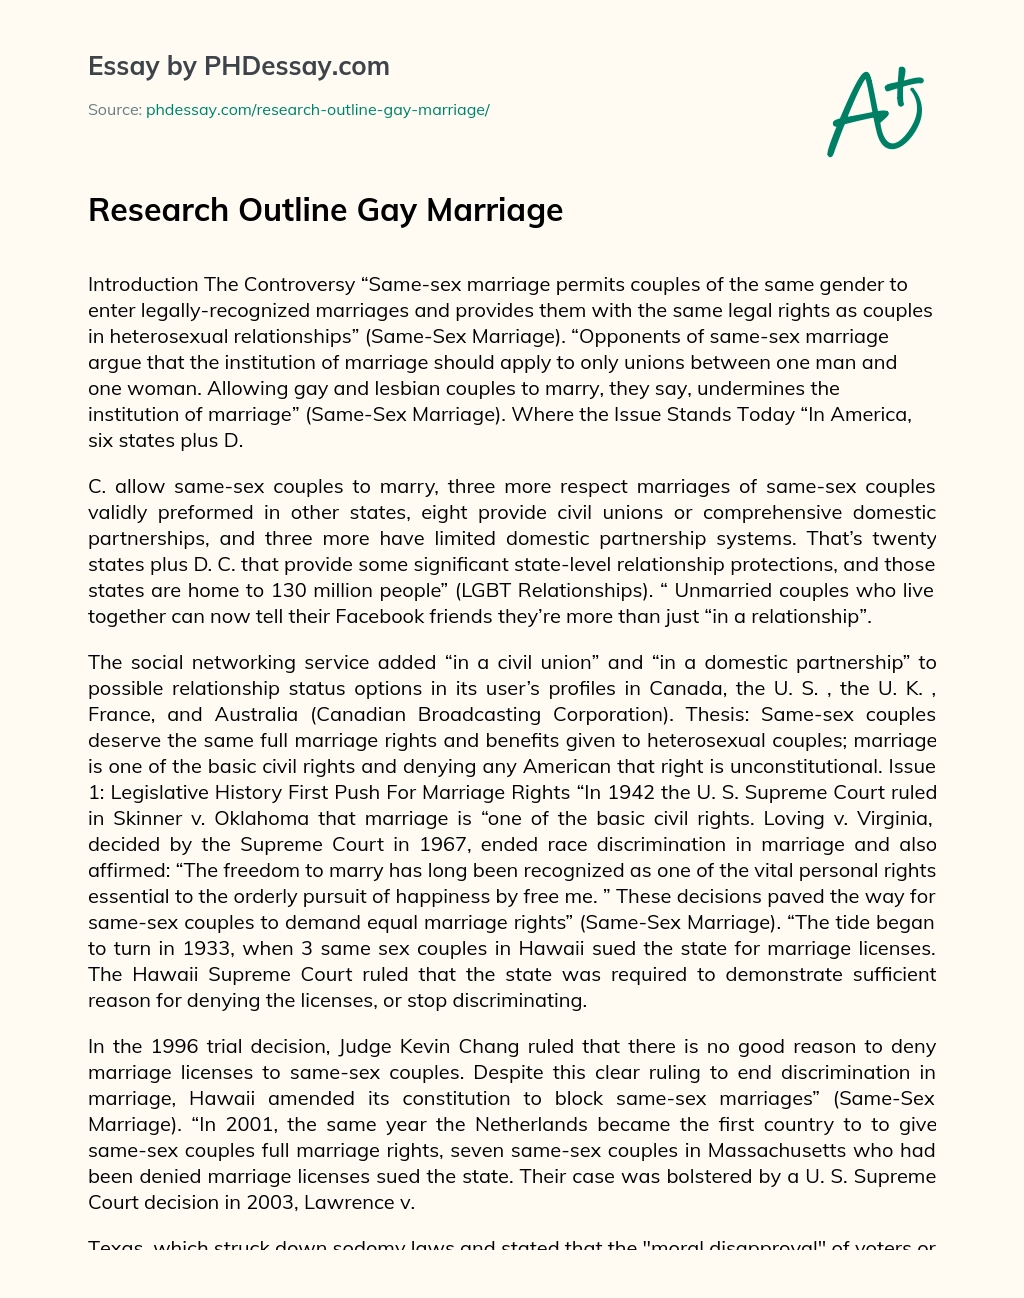 Research Outline Gay Marriage essay